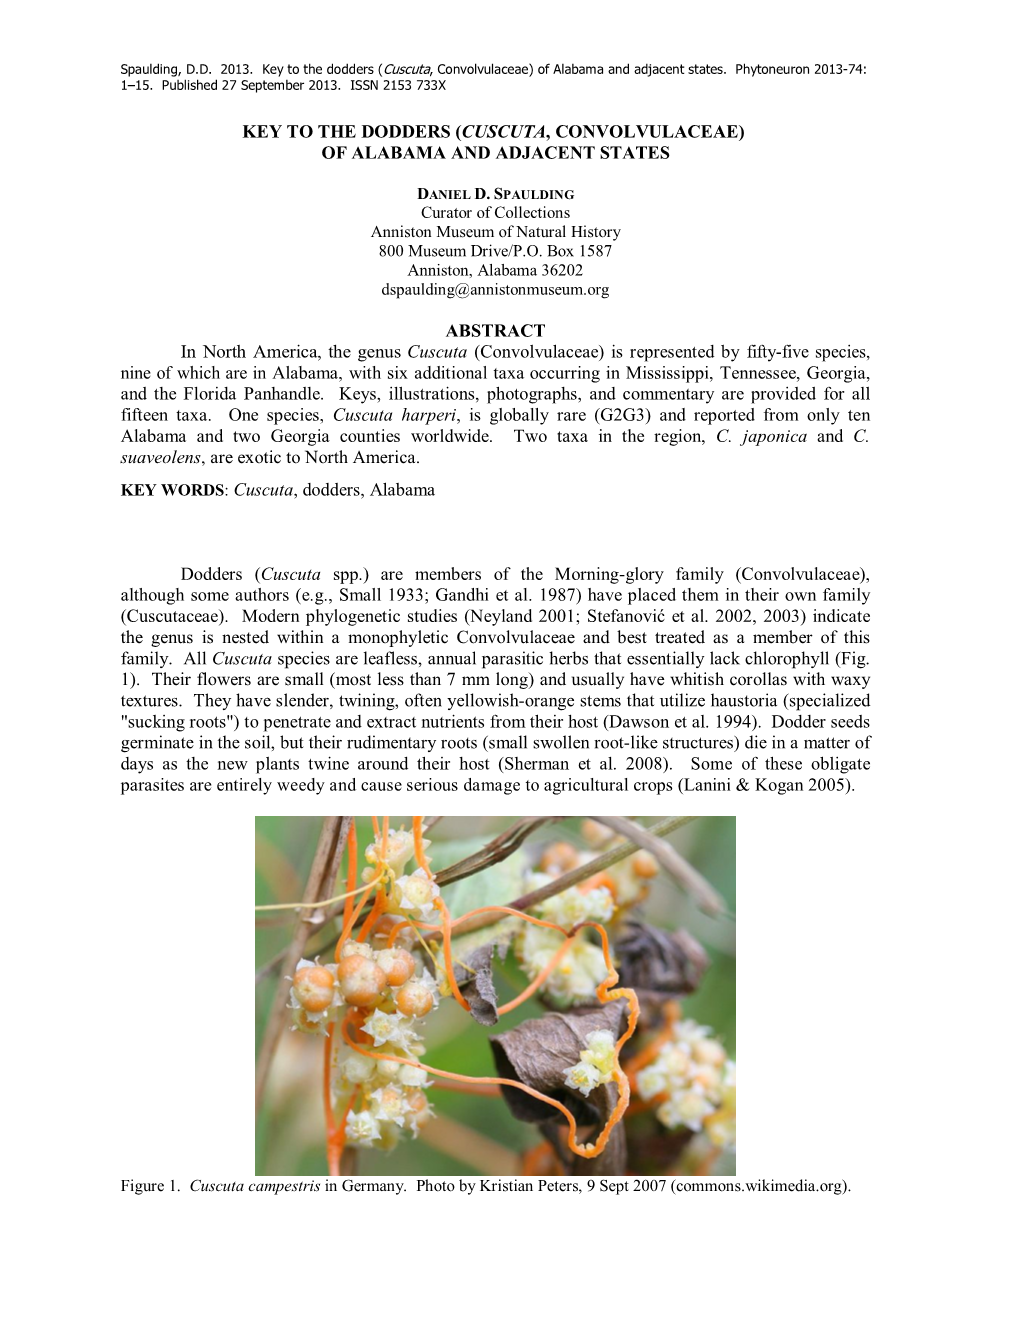 Key to the Dodders (Cuscuta, Convolvulaceae) of Alabama and Adjacent States